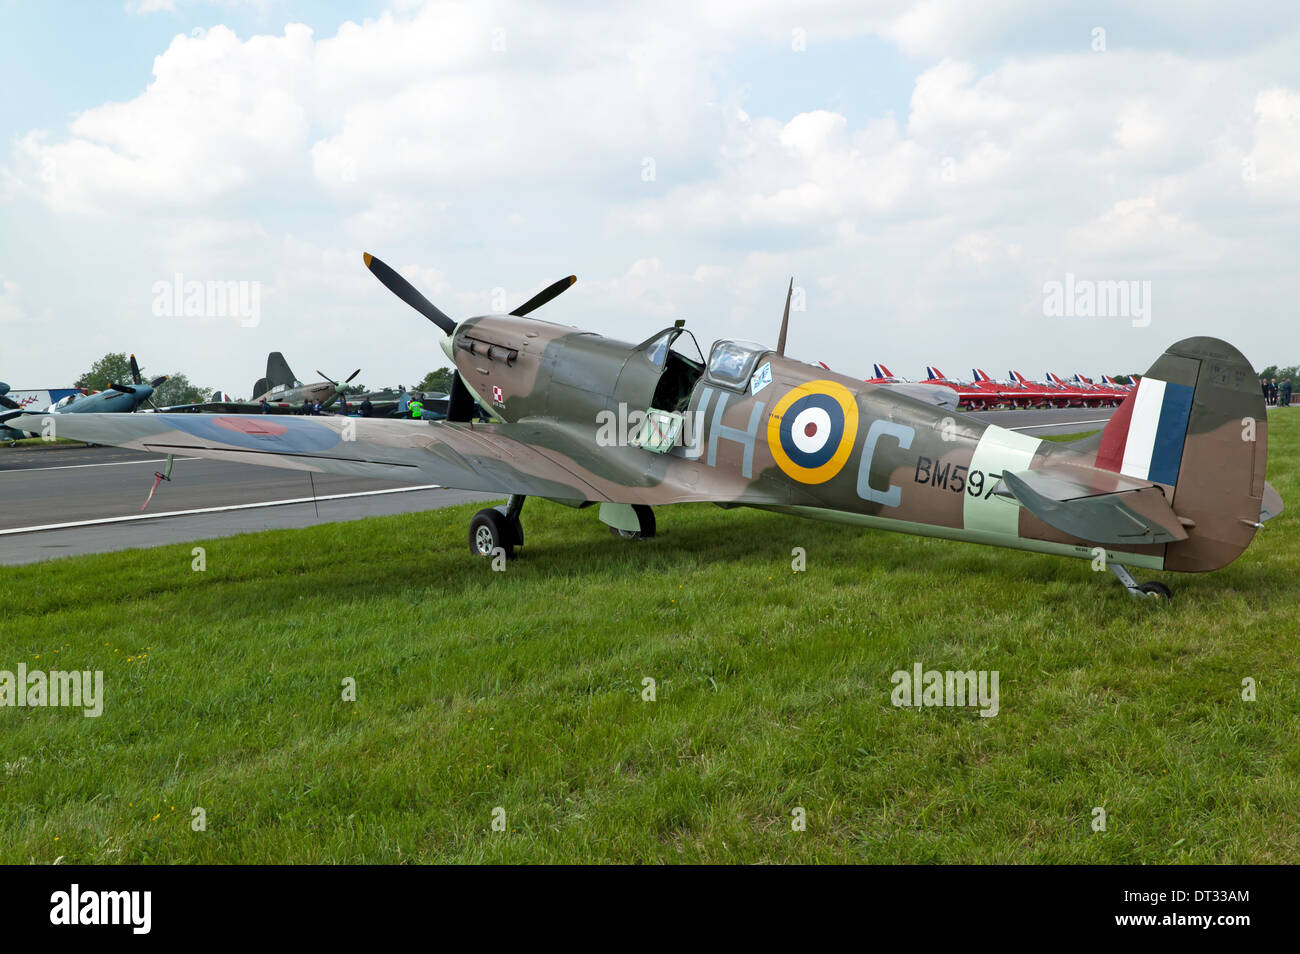 Side  view of BM597, a  Spitfire Mk Vb from WW2, on static display at Biggin Hill Air Show 2007. Stock Photo